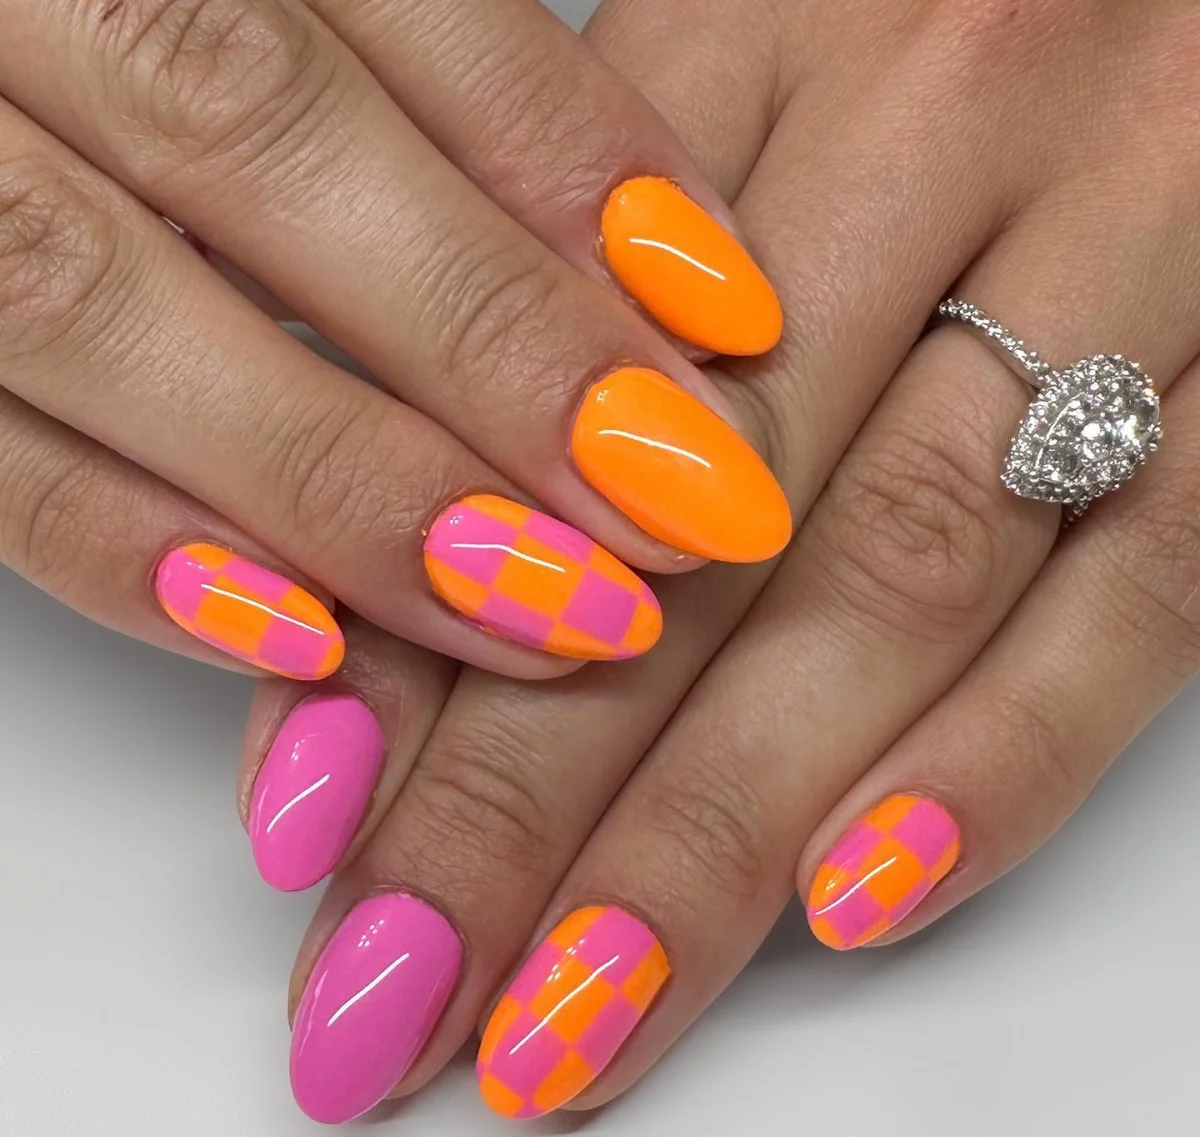 checkered nails in pink and orange